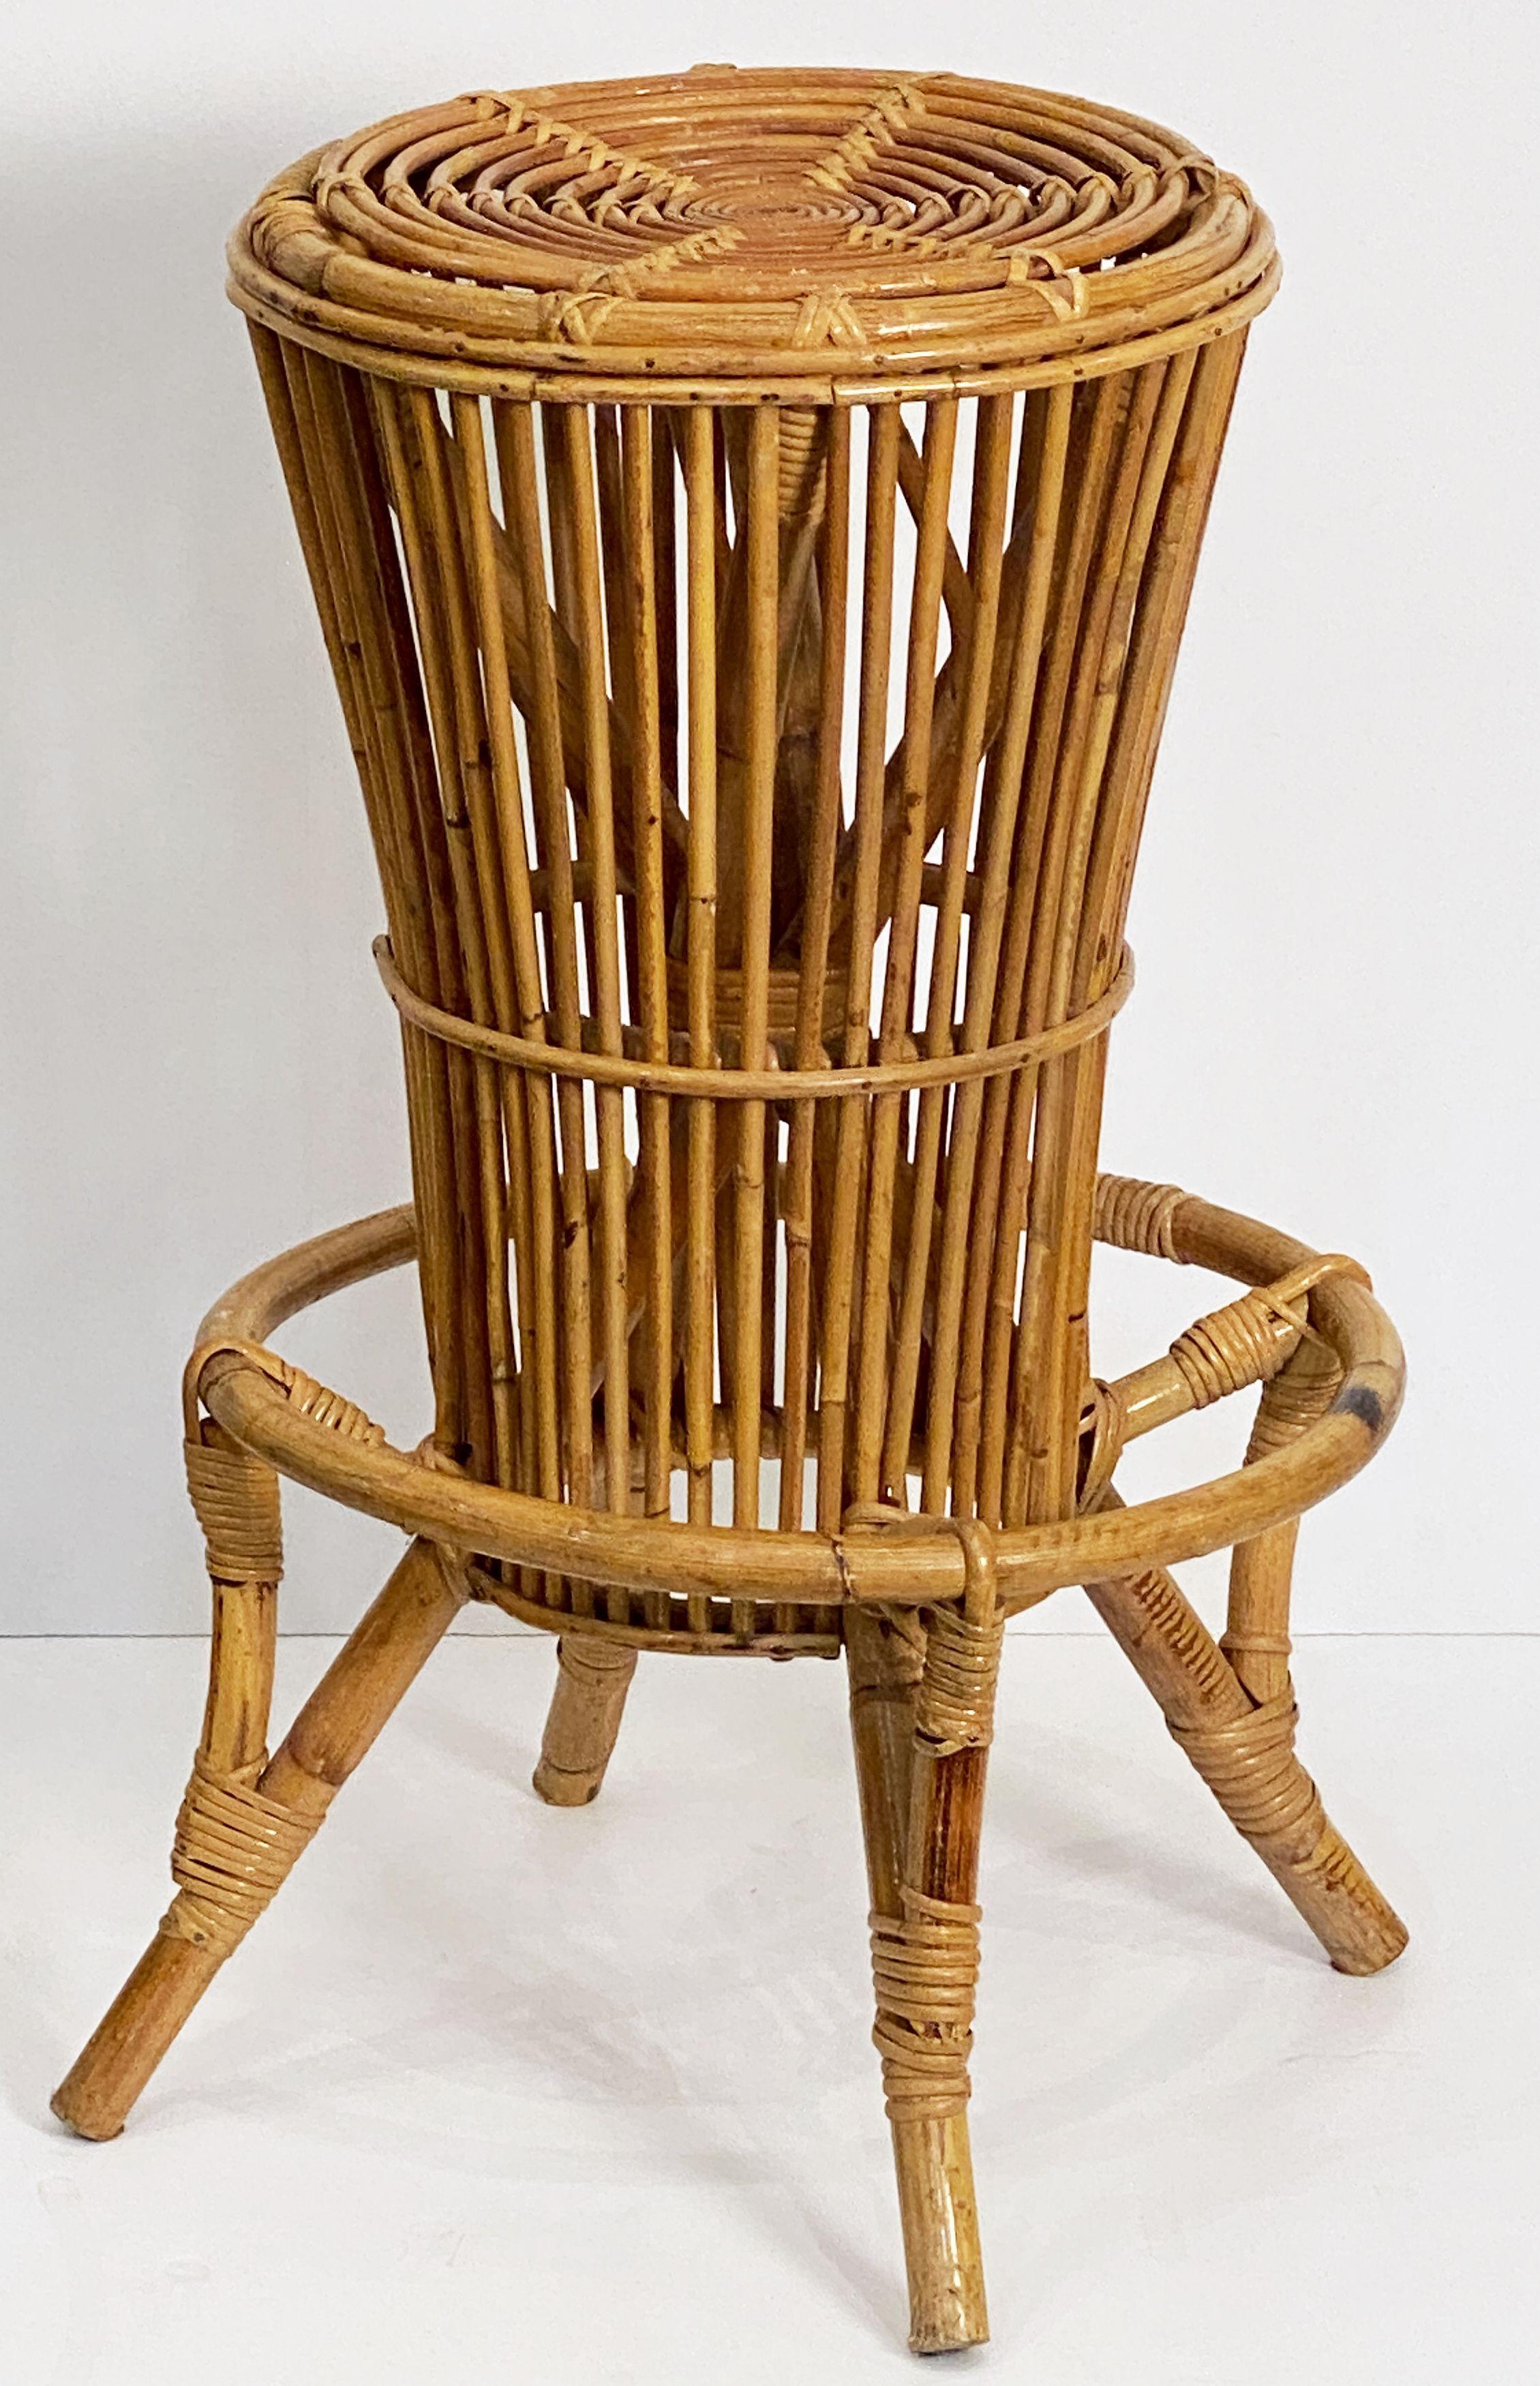 Italian Stool of Rattan and Bamboo from the Mid-20th Century For Sale 12